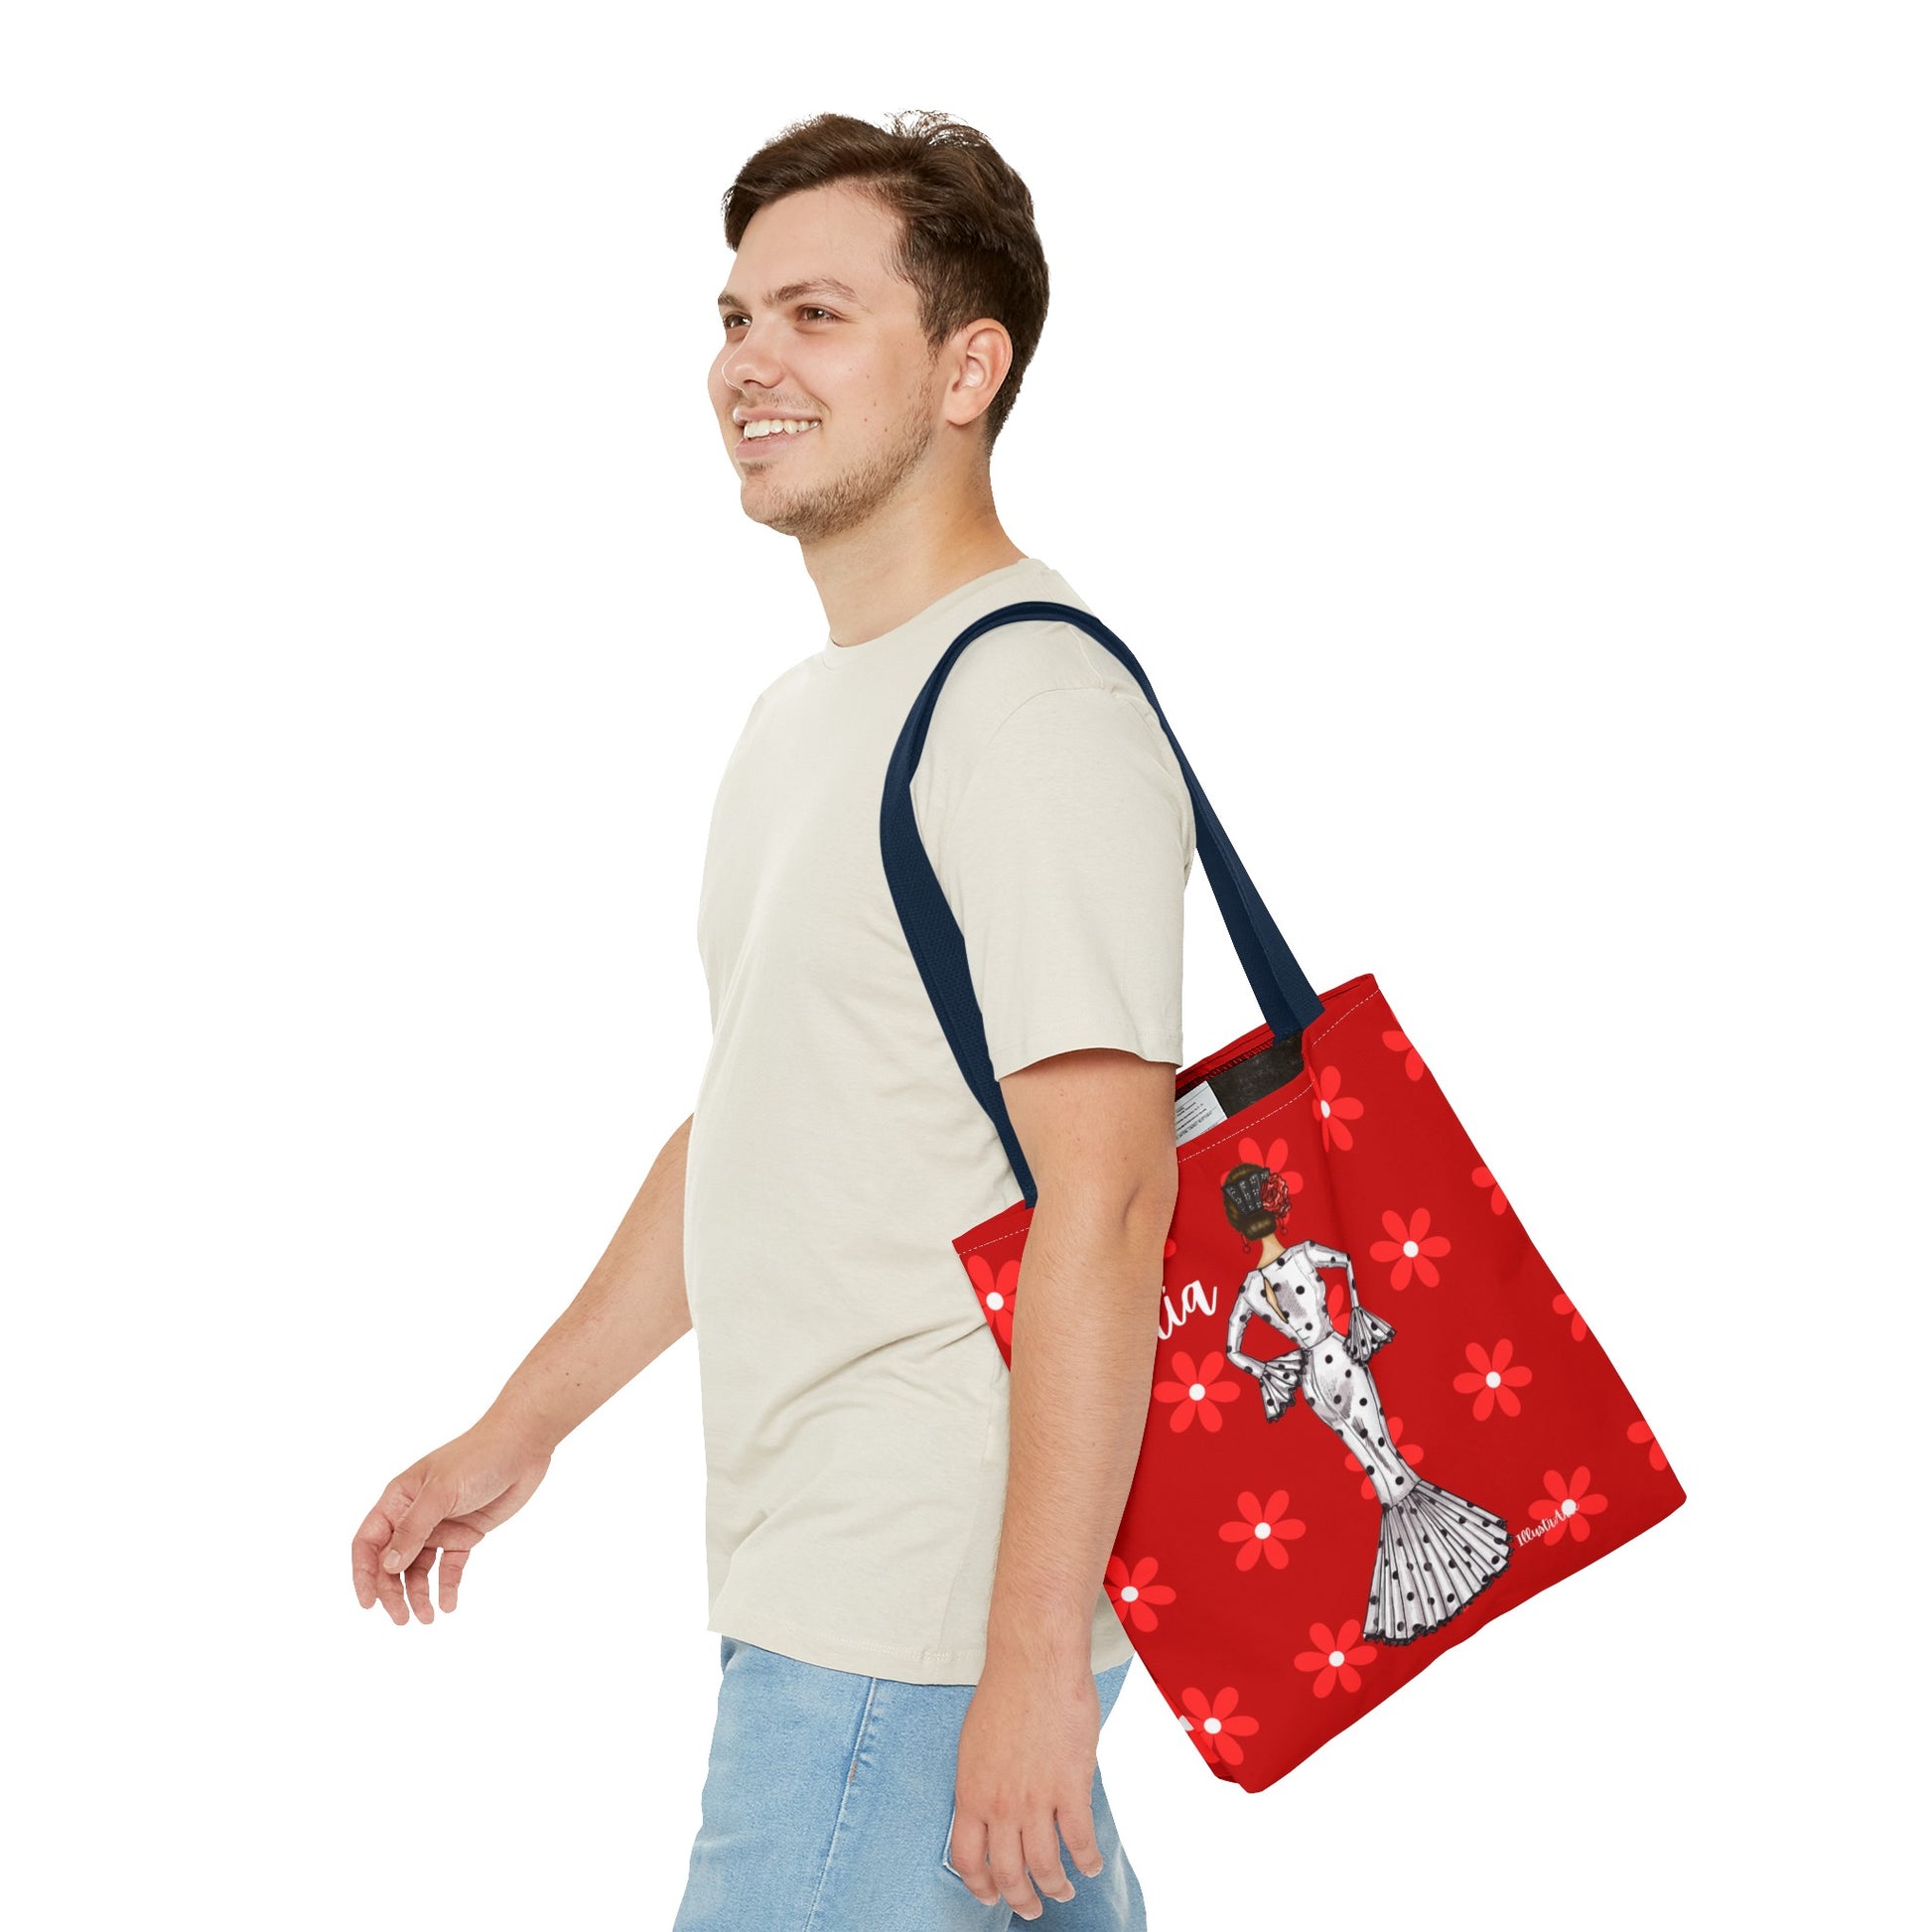 a man carrying a red bag with a lady on it